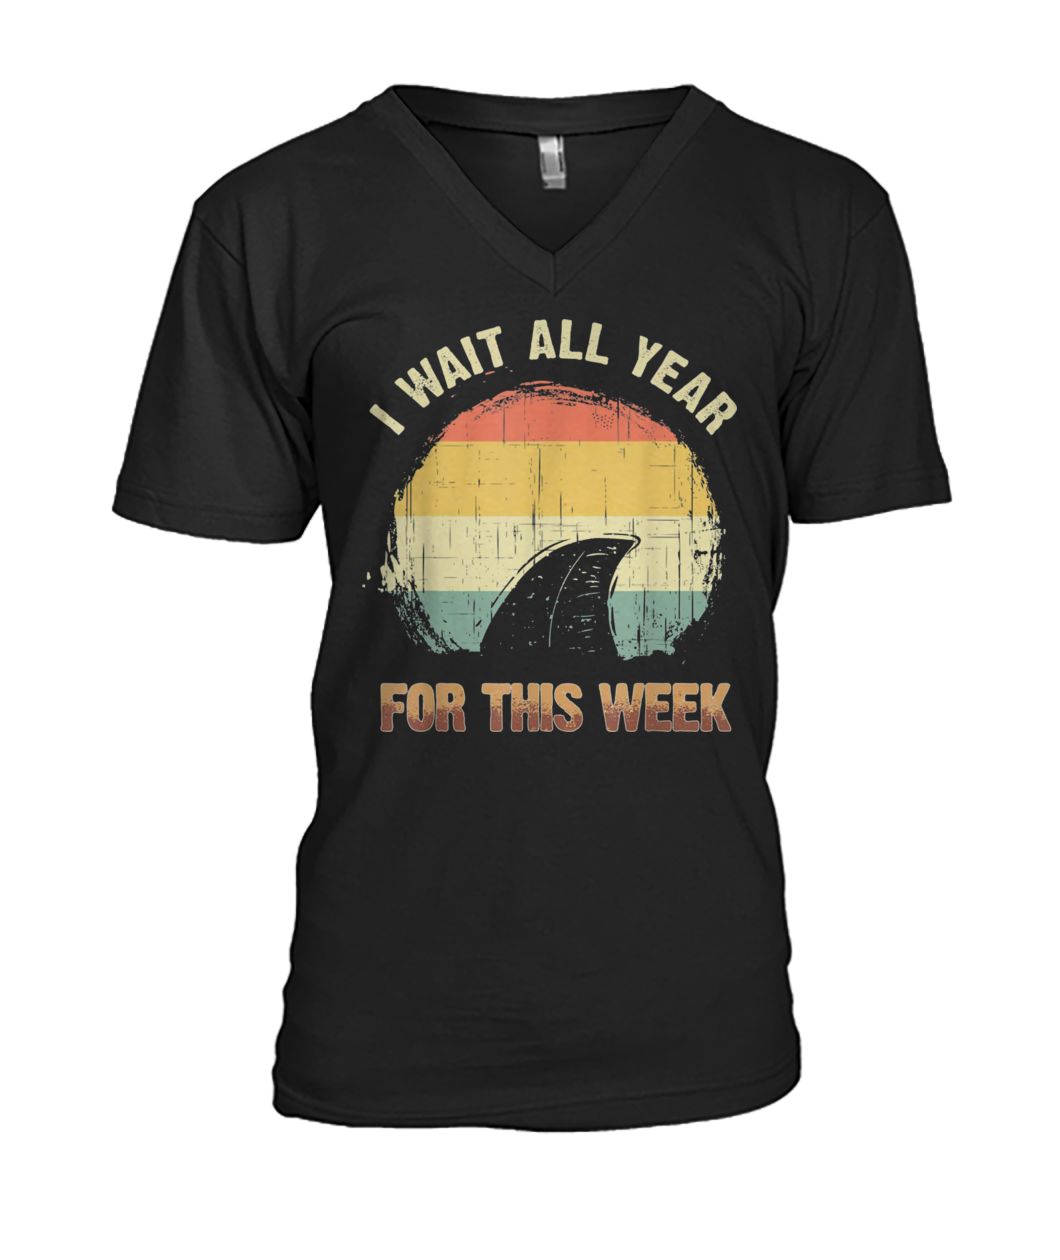 I wait all year for this week shark mens v-neck